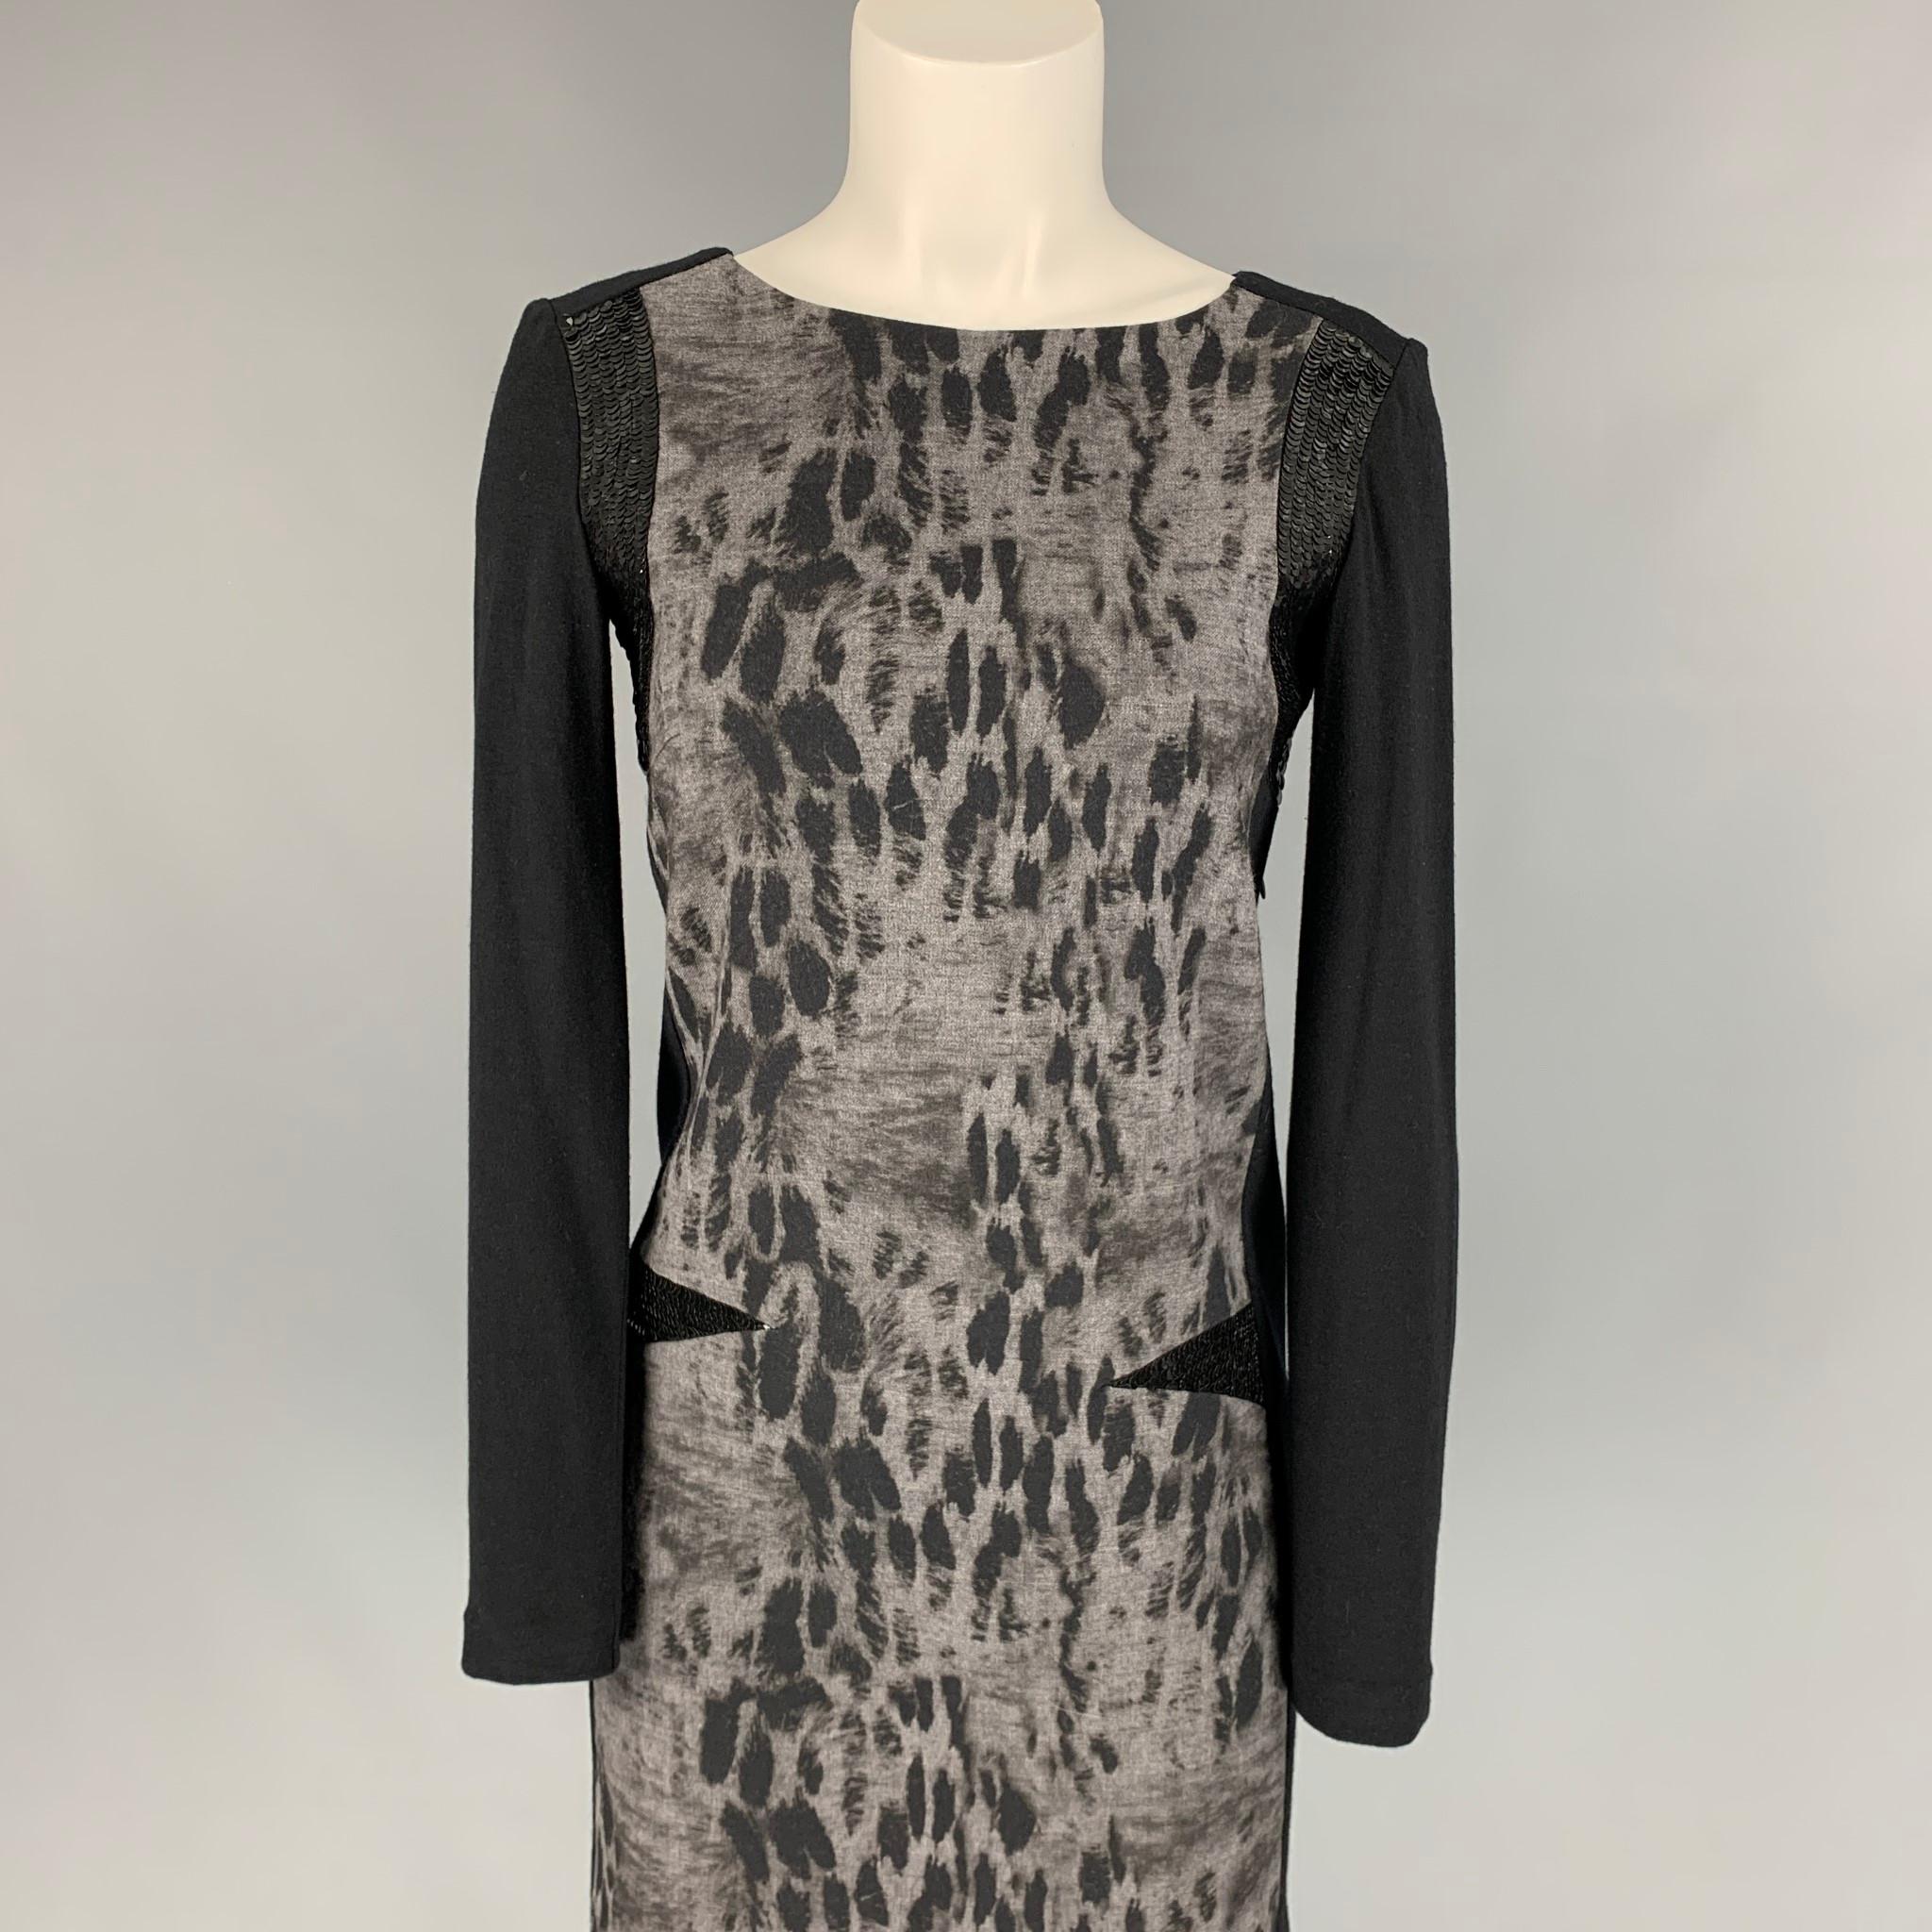 PHILOSOPHY di ALBERTA FERRETTI dress comes in a black & grey rayon blend featuring a shift style, sequined panel, and a side zipper closure. Made in Italy. 

Very Good Pre-Owned Condition.
Marked: I 38 / F 34 / D 34 / GB 6 / USA